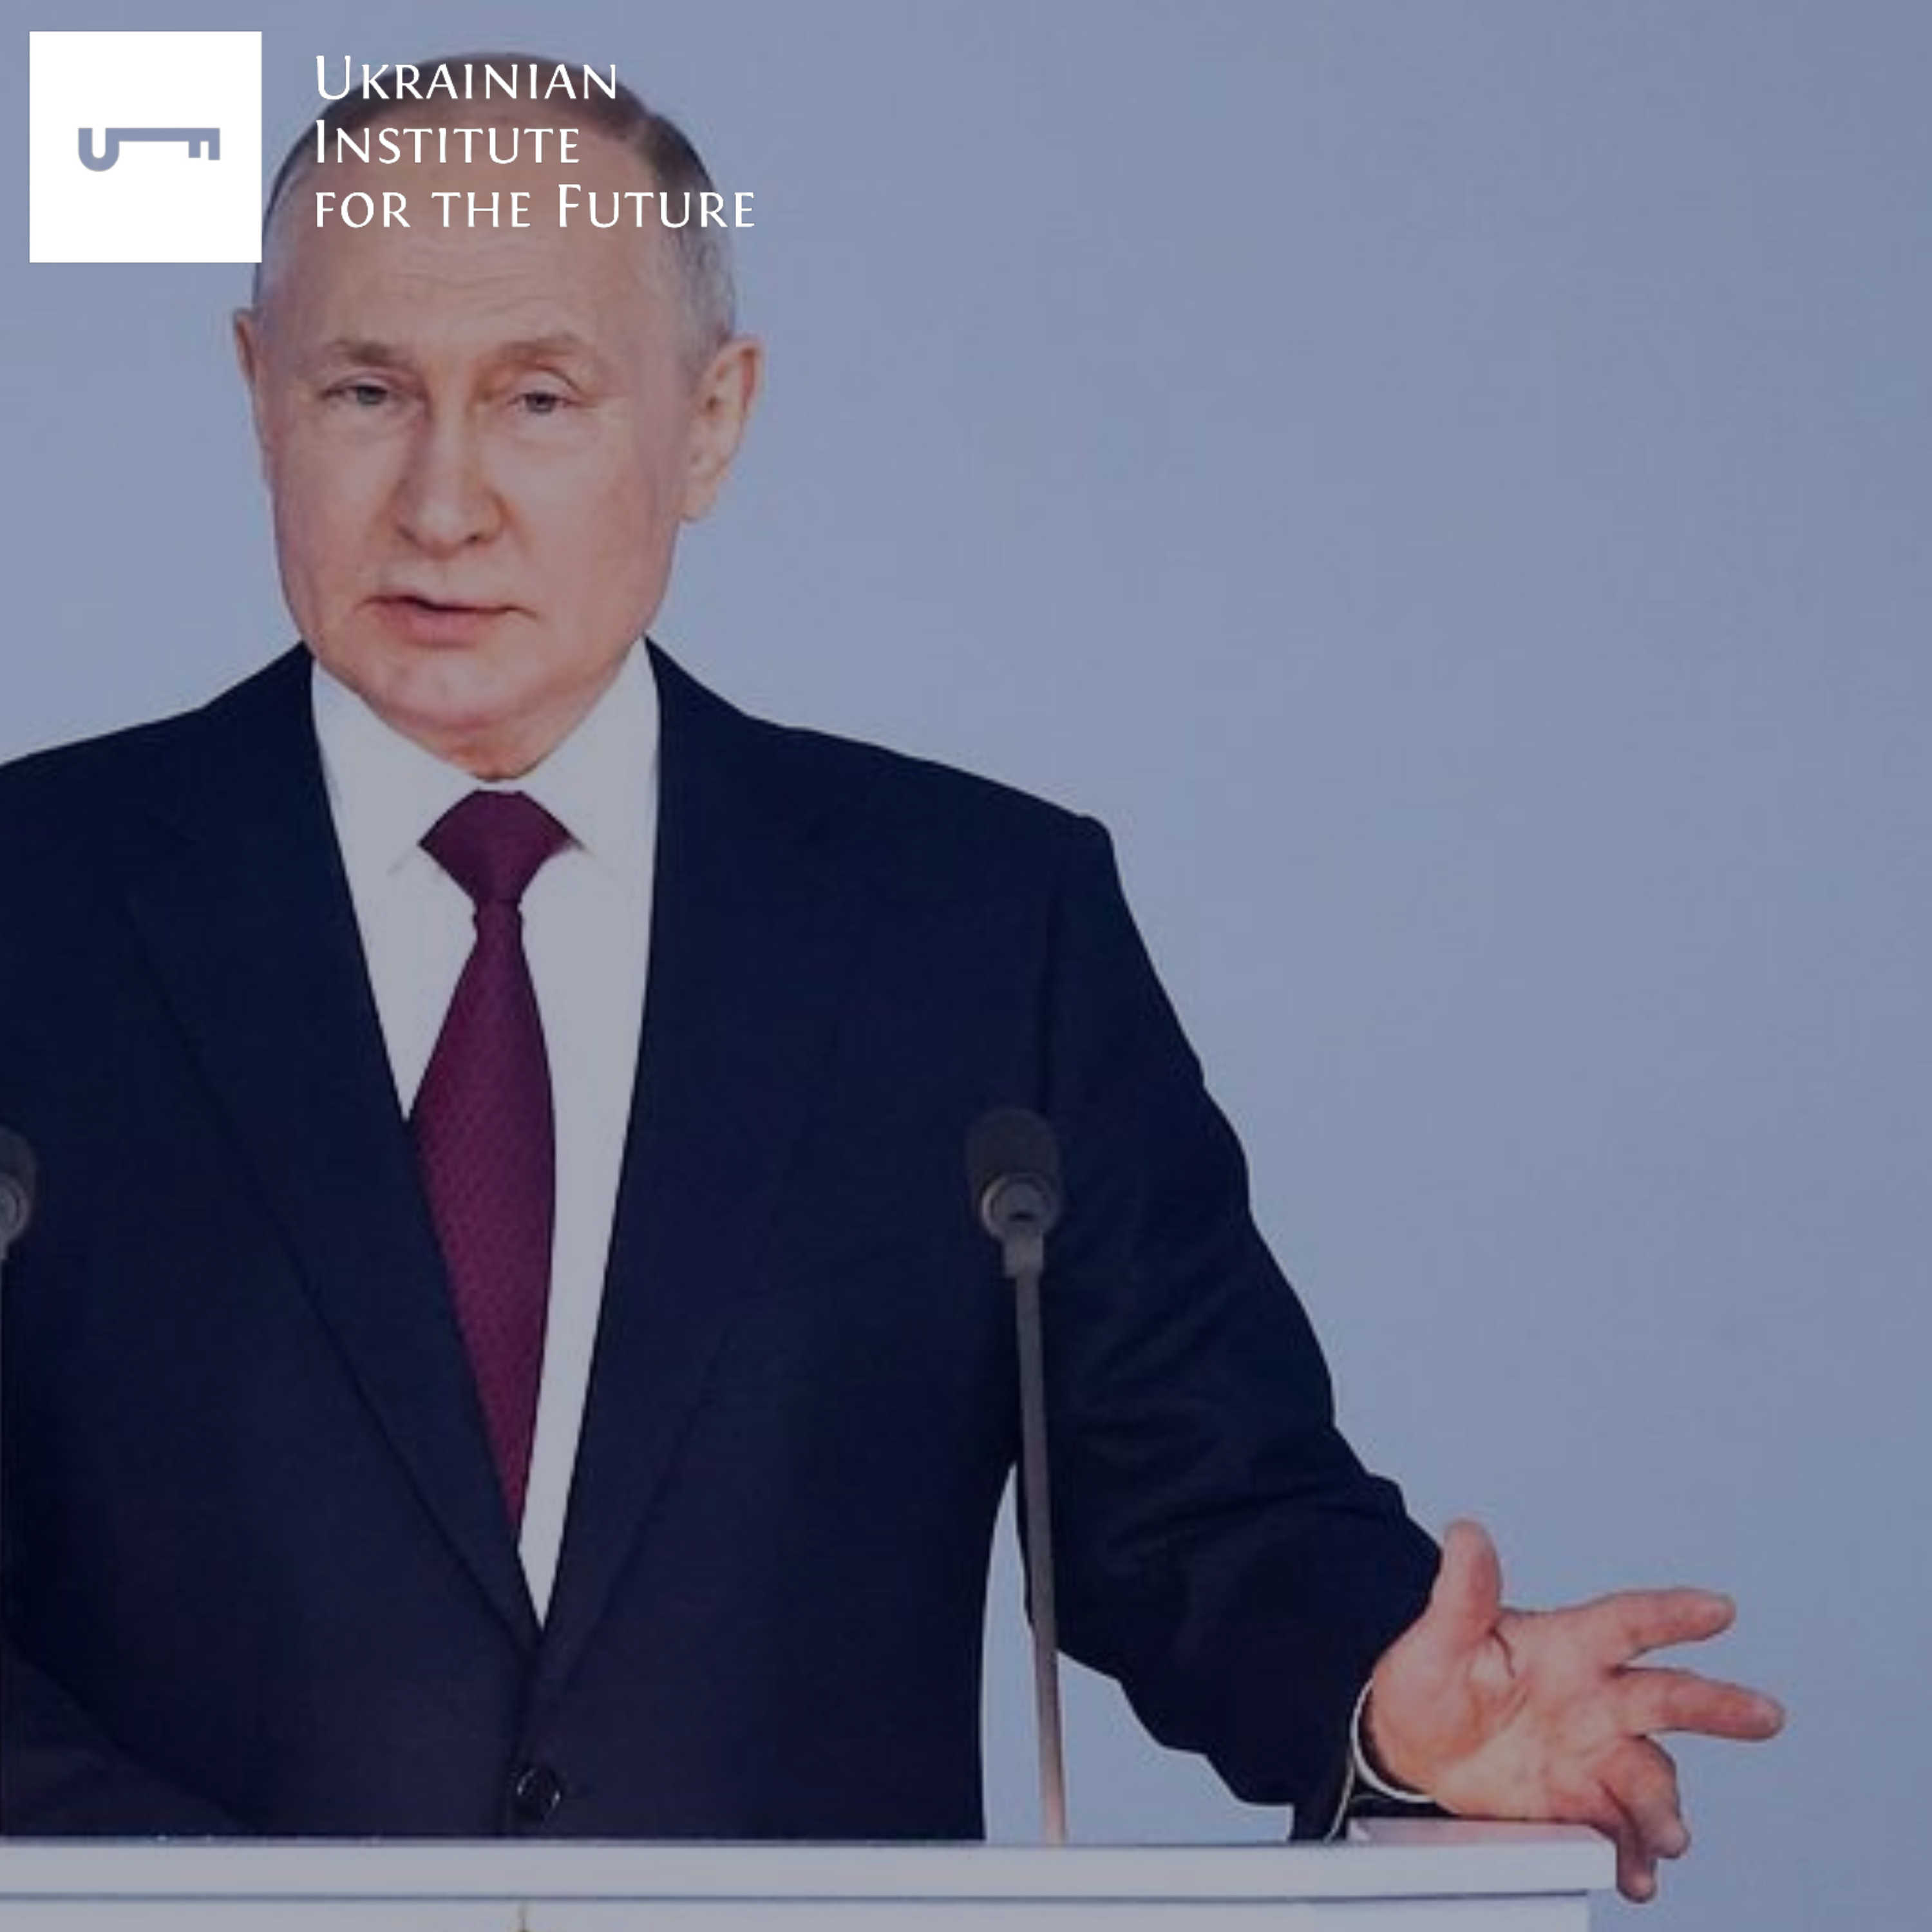 <strong>Putin's speech: long war, nuclear blackmail, and stability</strong>